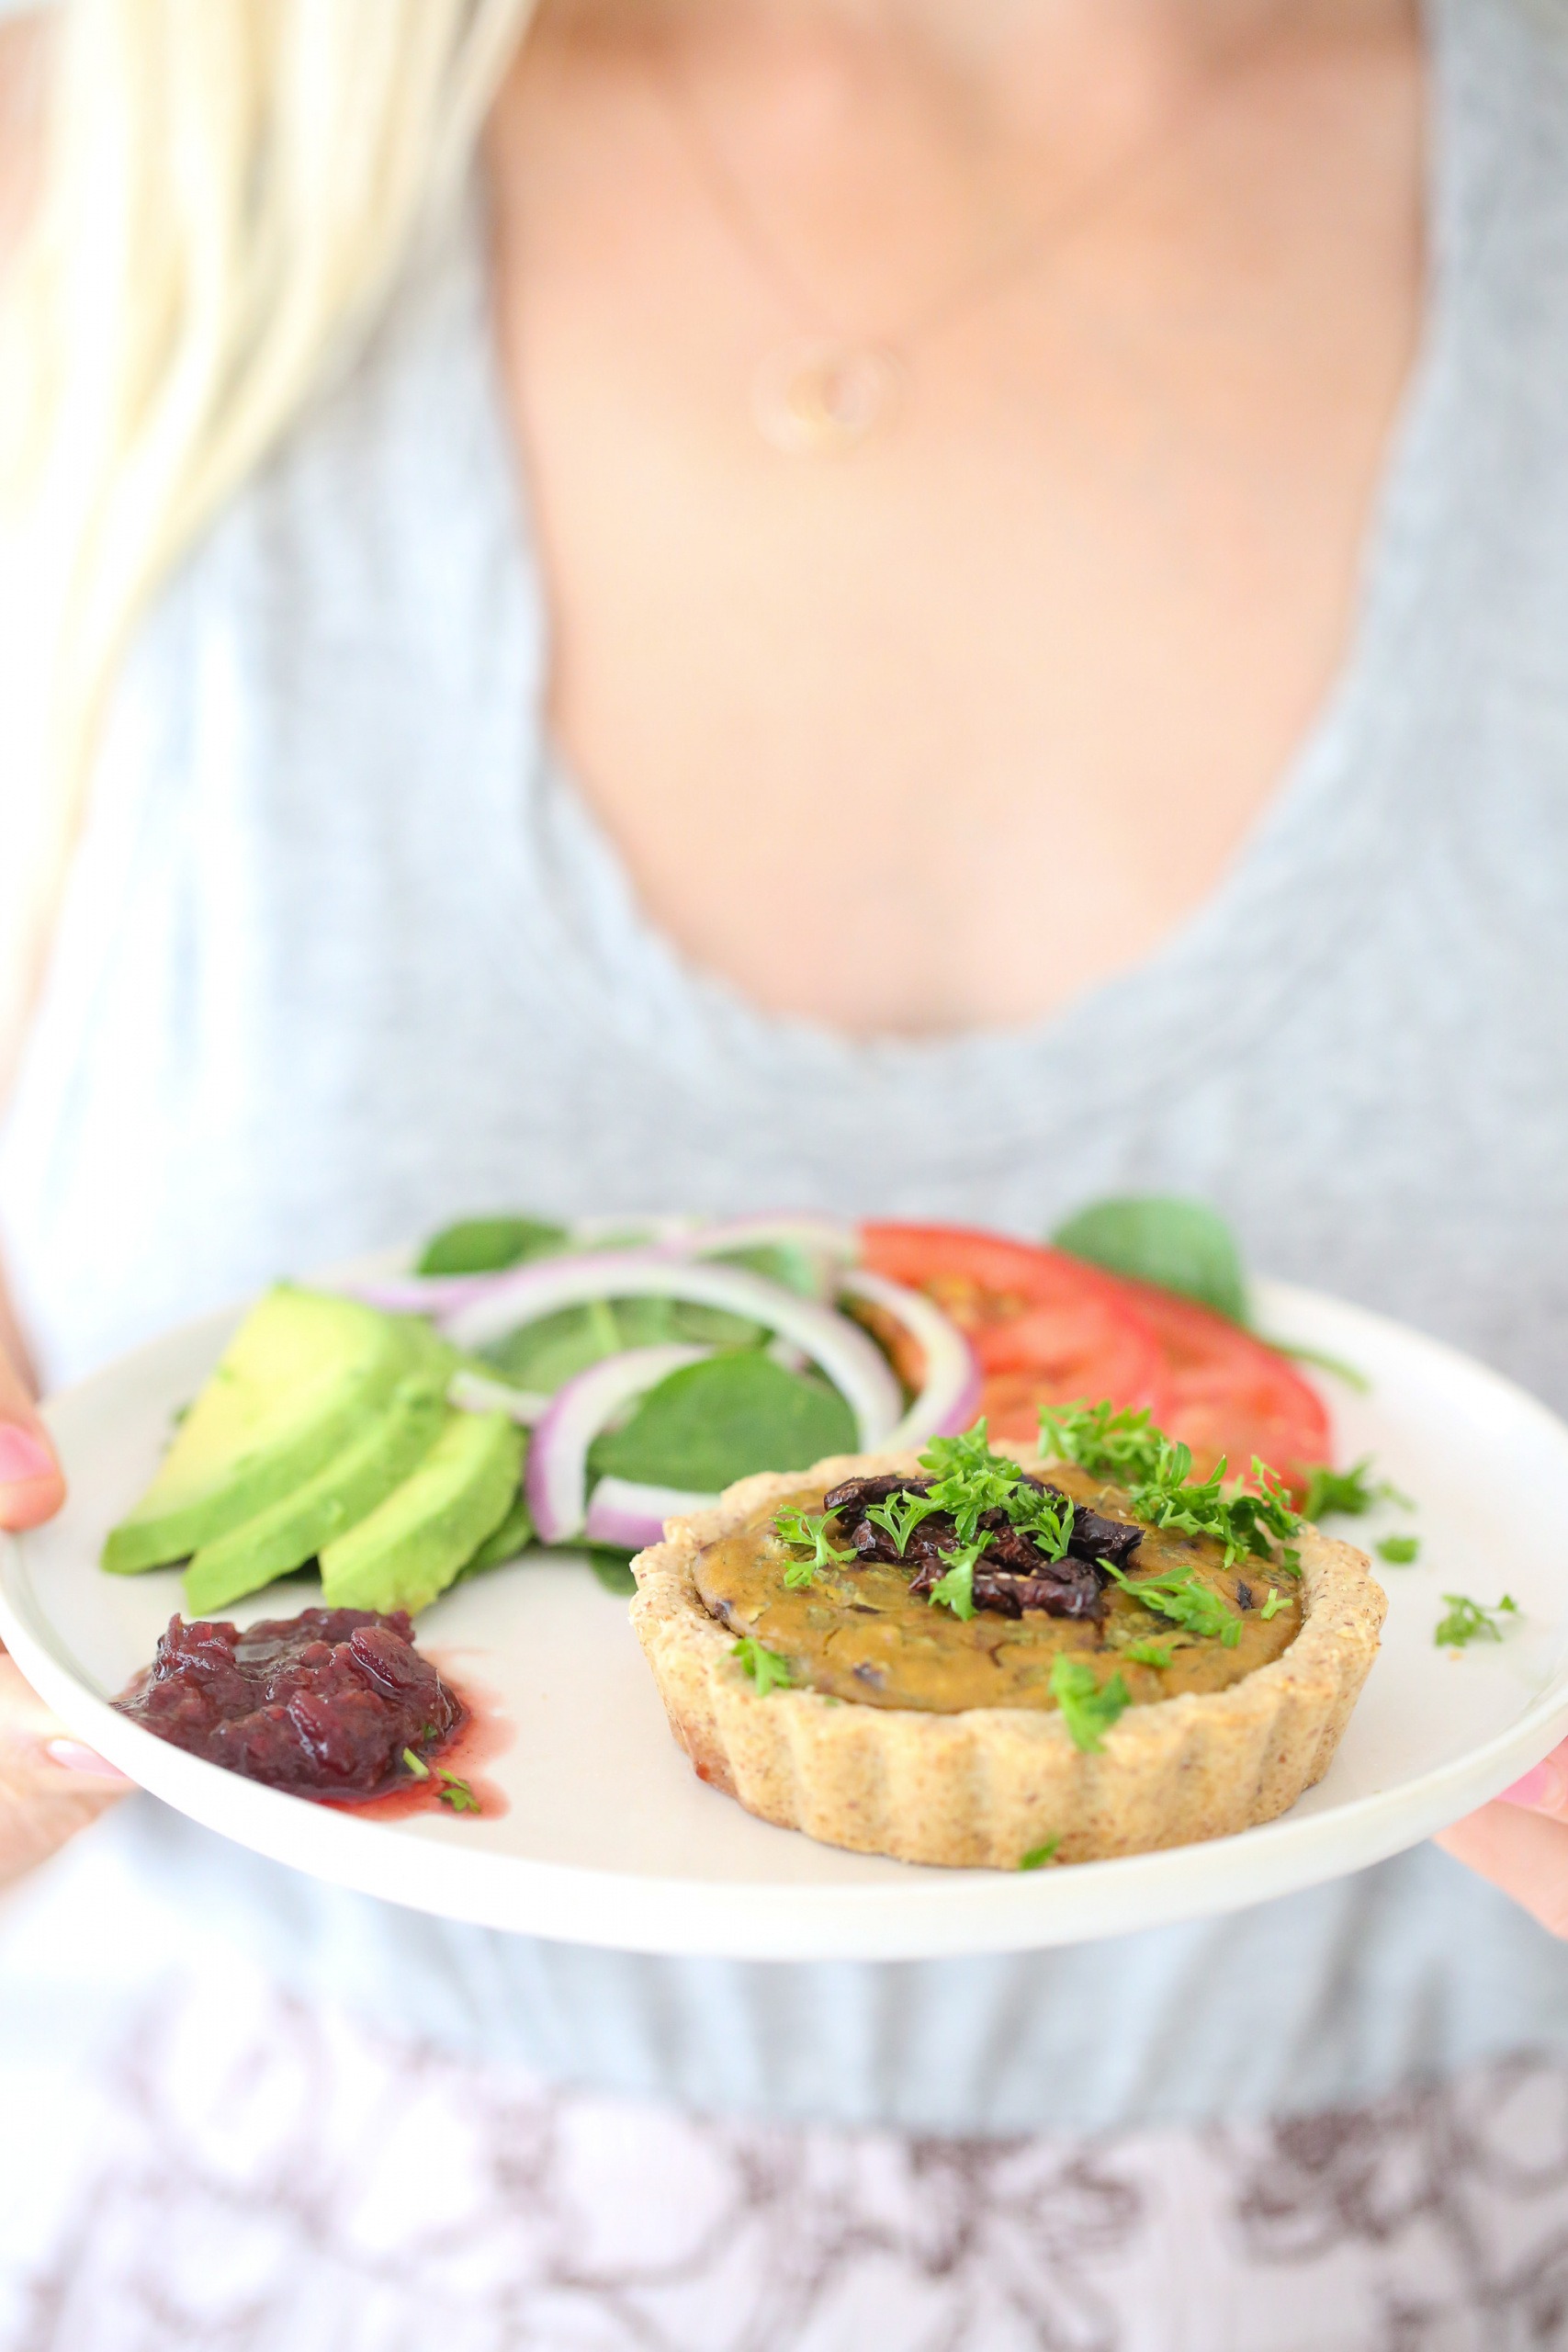 Vegan mini quiche topped with relish, parsley, salad, red onion, tomato, and avocado